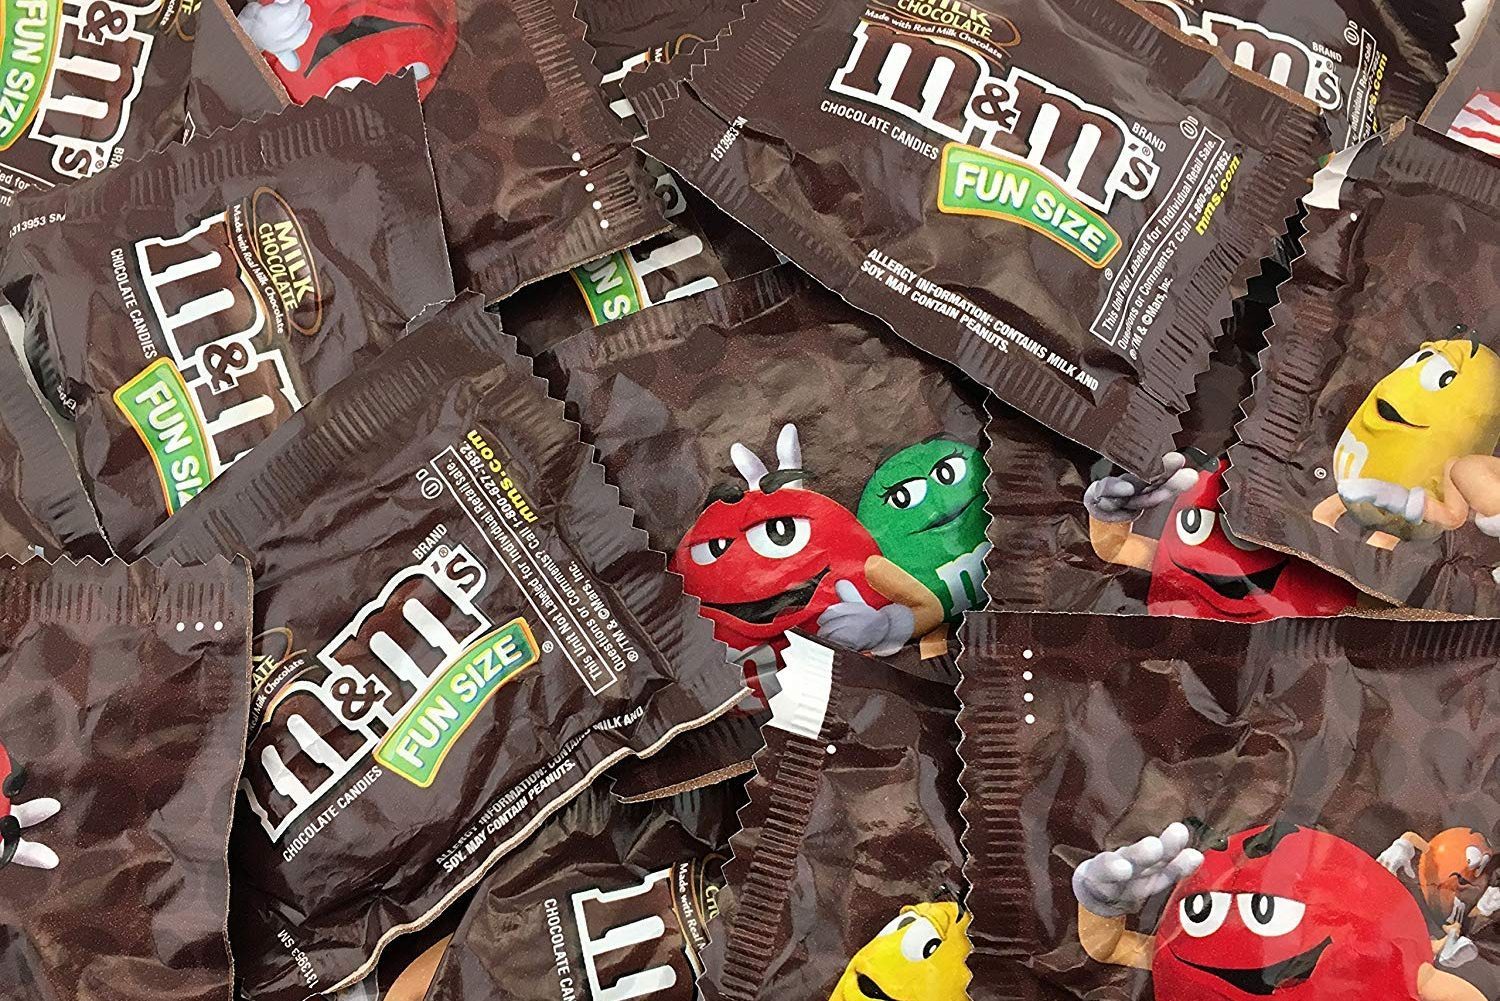 7 Interesting Facts About M&M's You've Never Heard